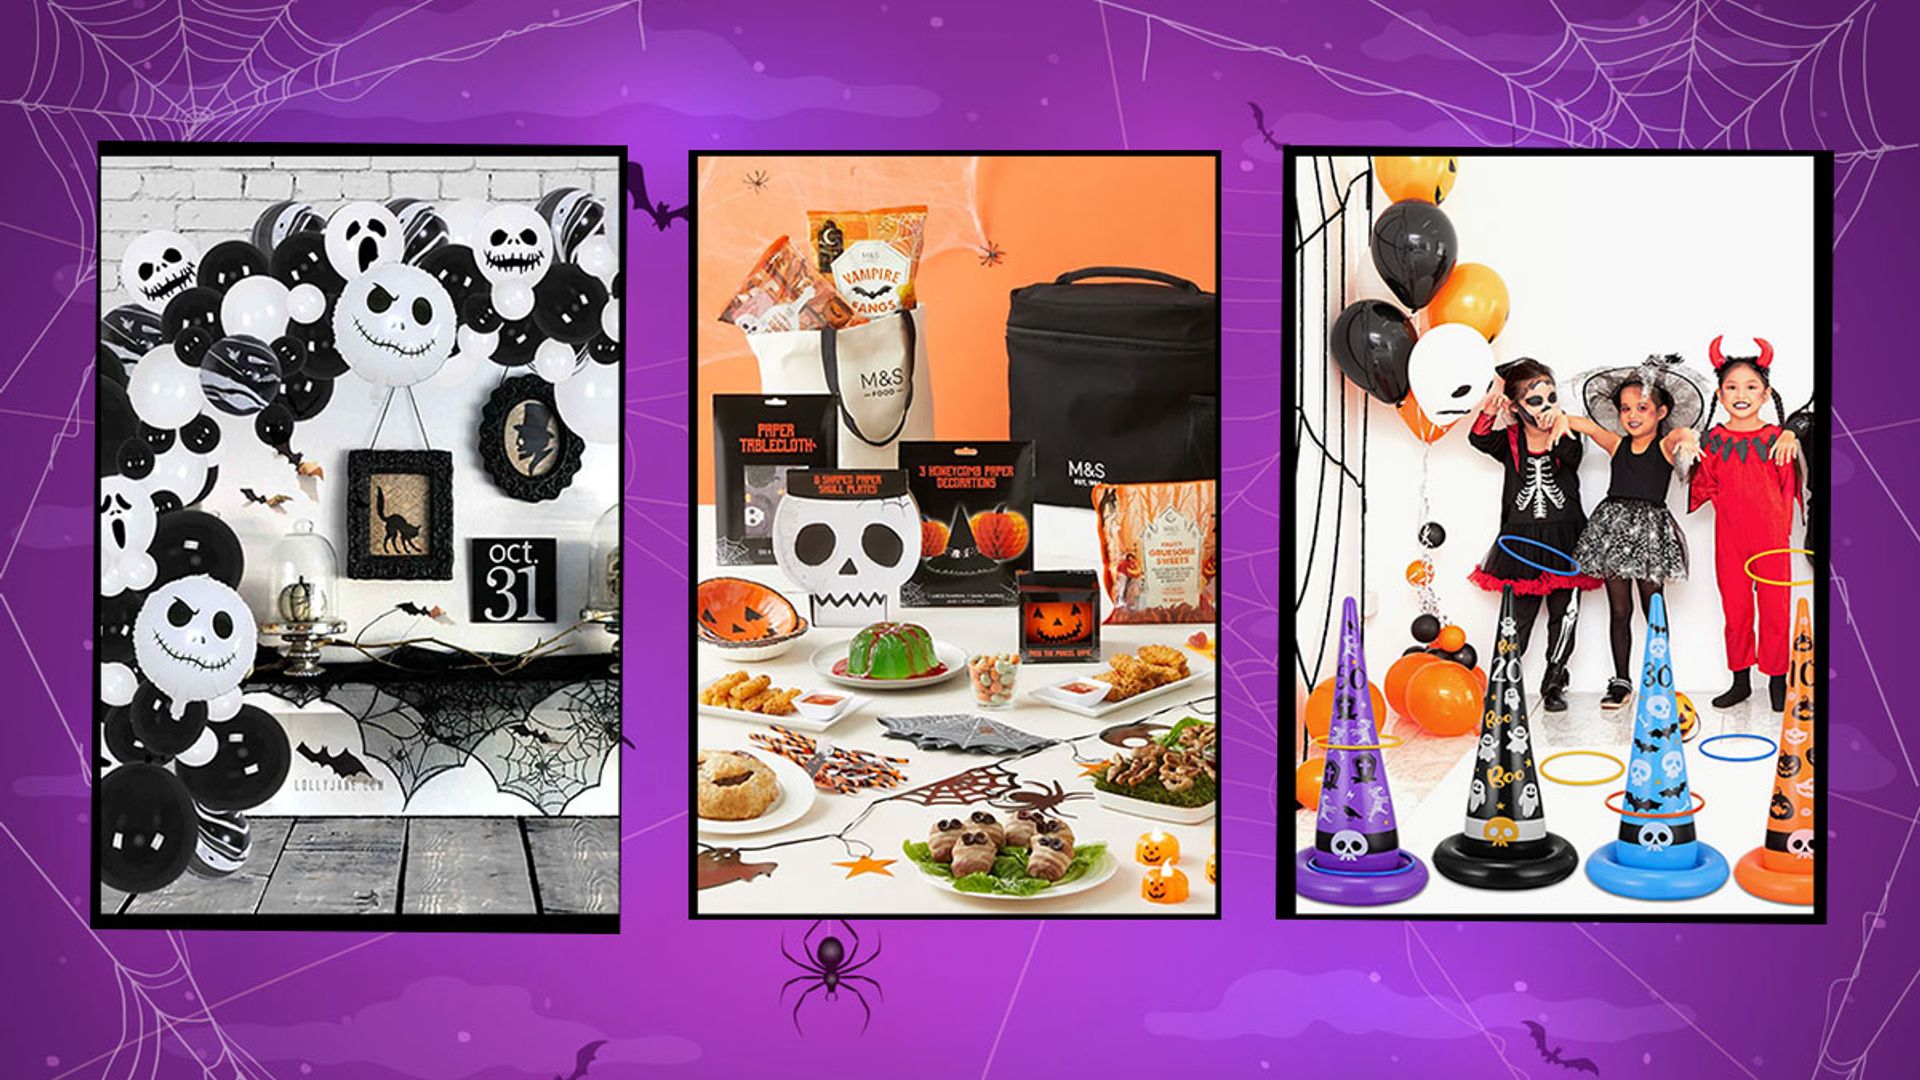 Best Halloween party supplies: Scary party food ideas, games, kids gift bags & MORE